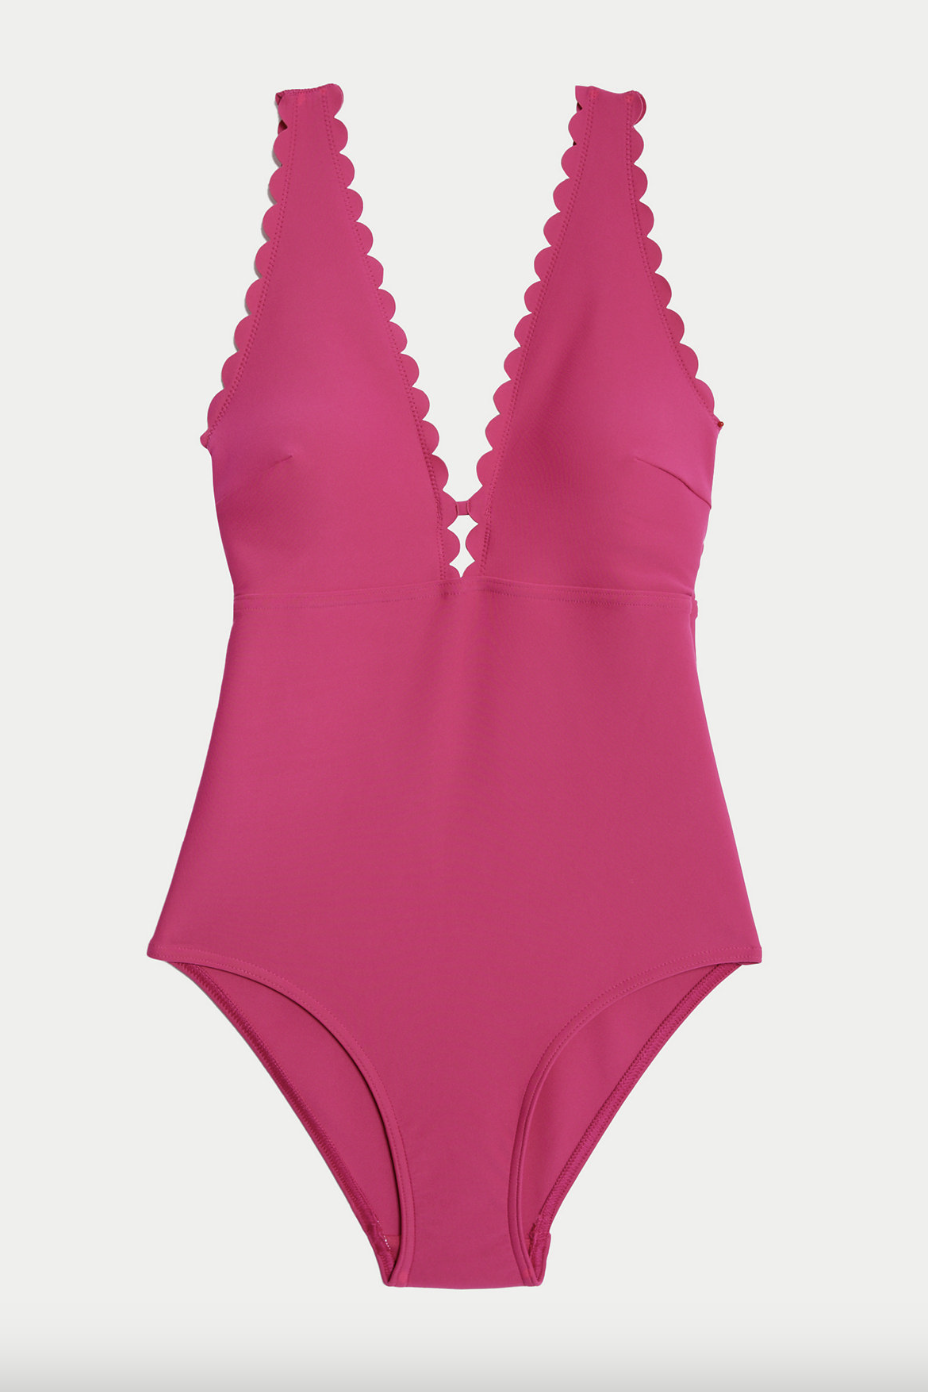 Birmingham Live on X: Marks & Spencer's £30 swimsuit with 'good